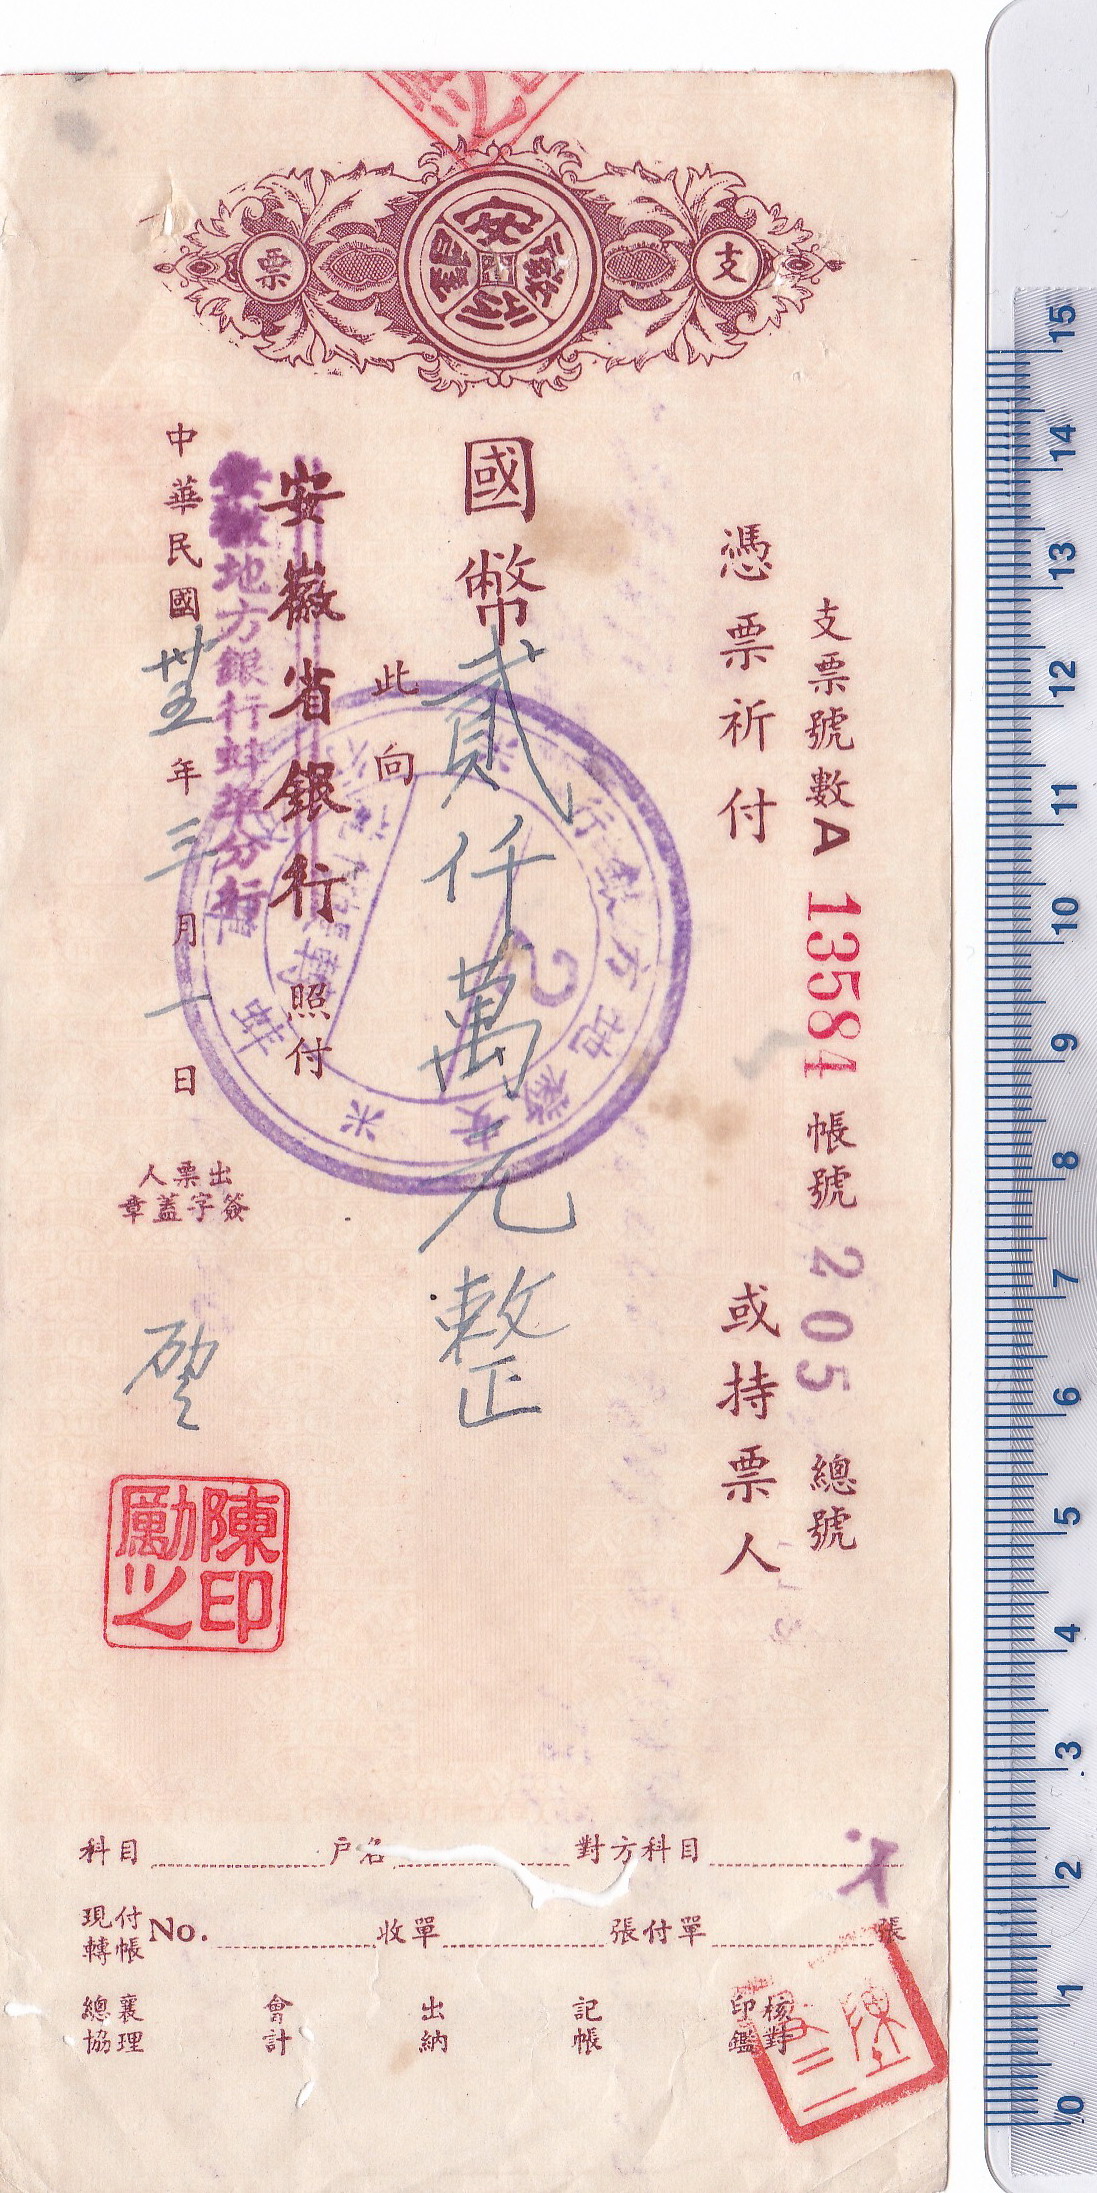 D1720, Check of Anhui Province Bank, China 1946 Cheque